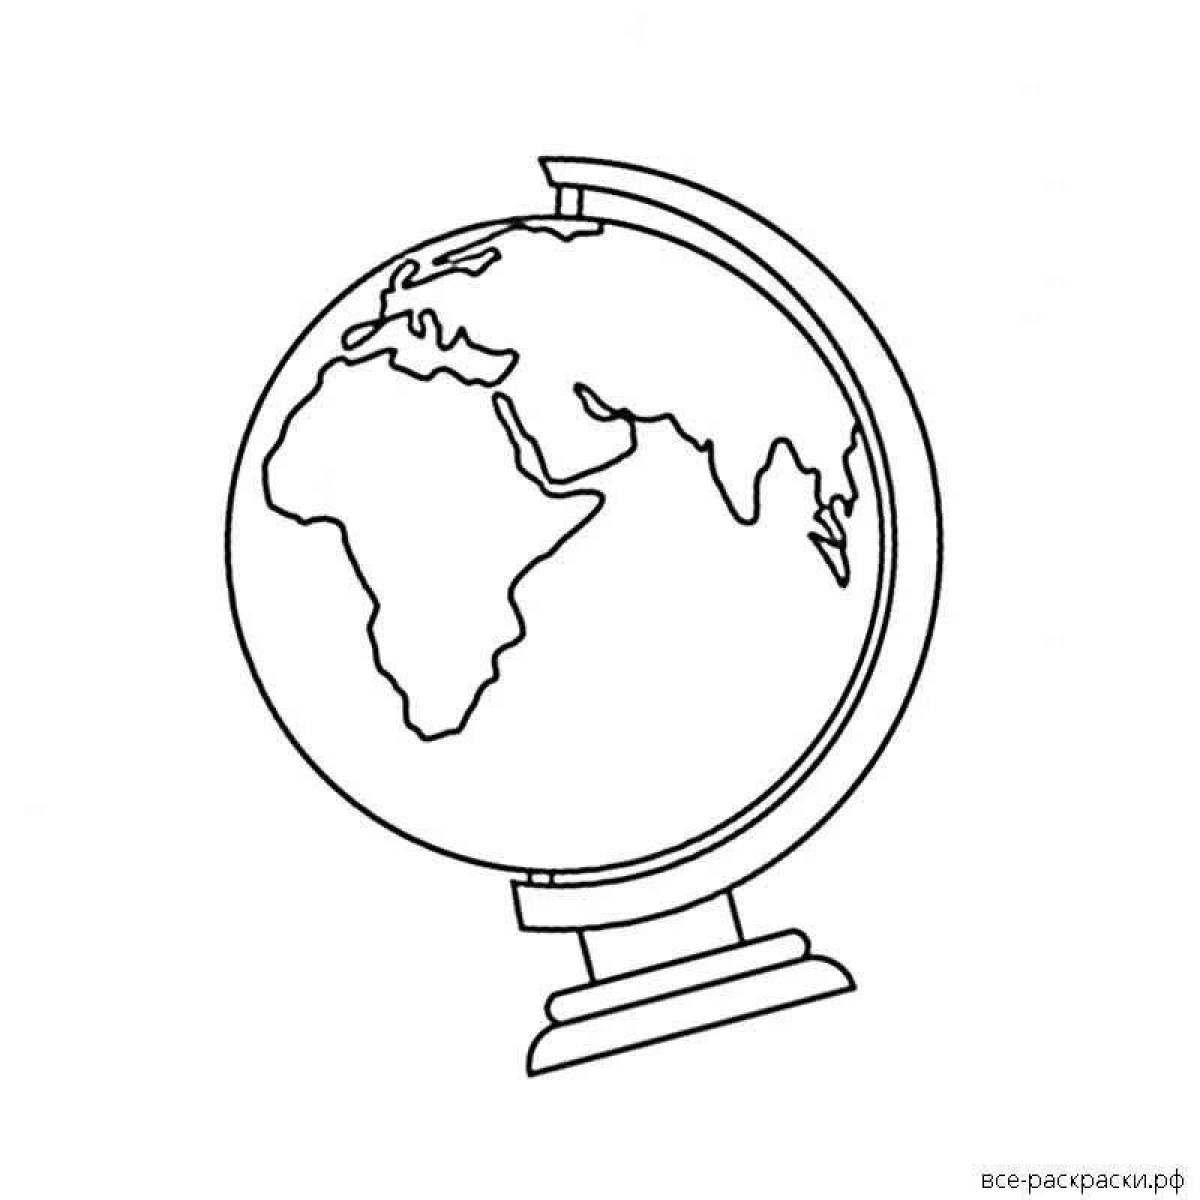 Colourful globe coloring page